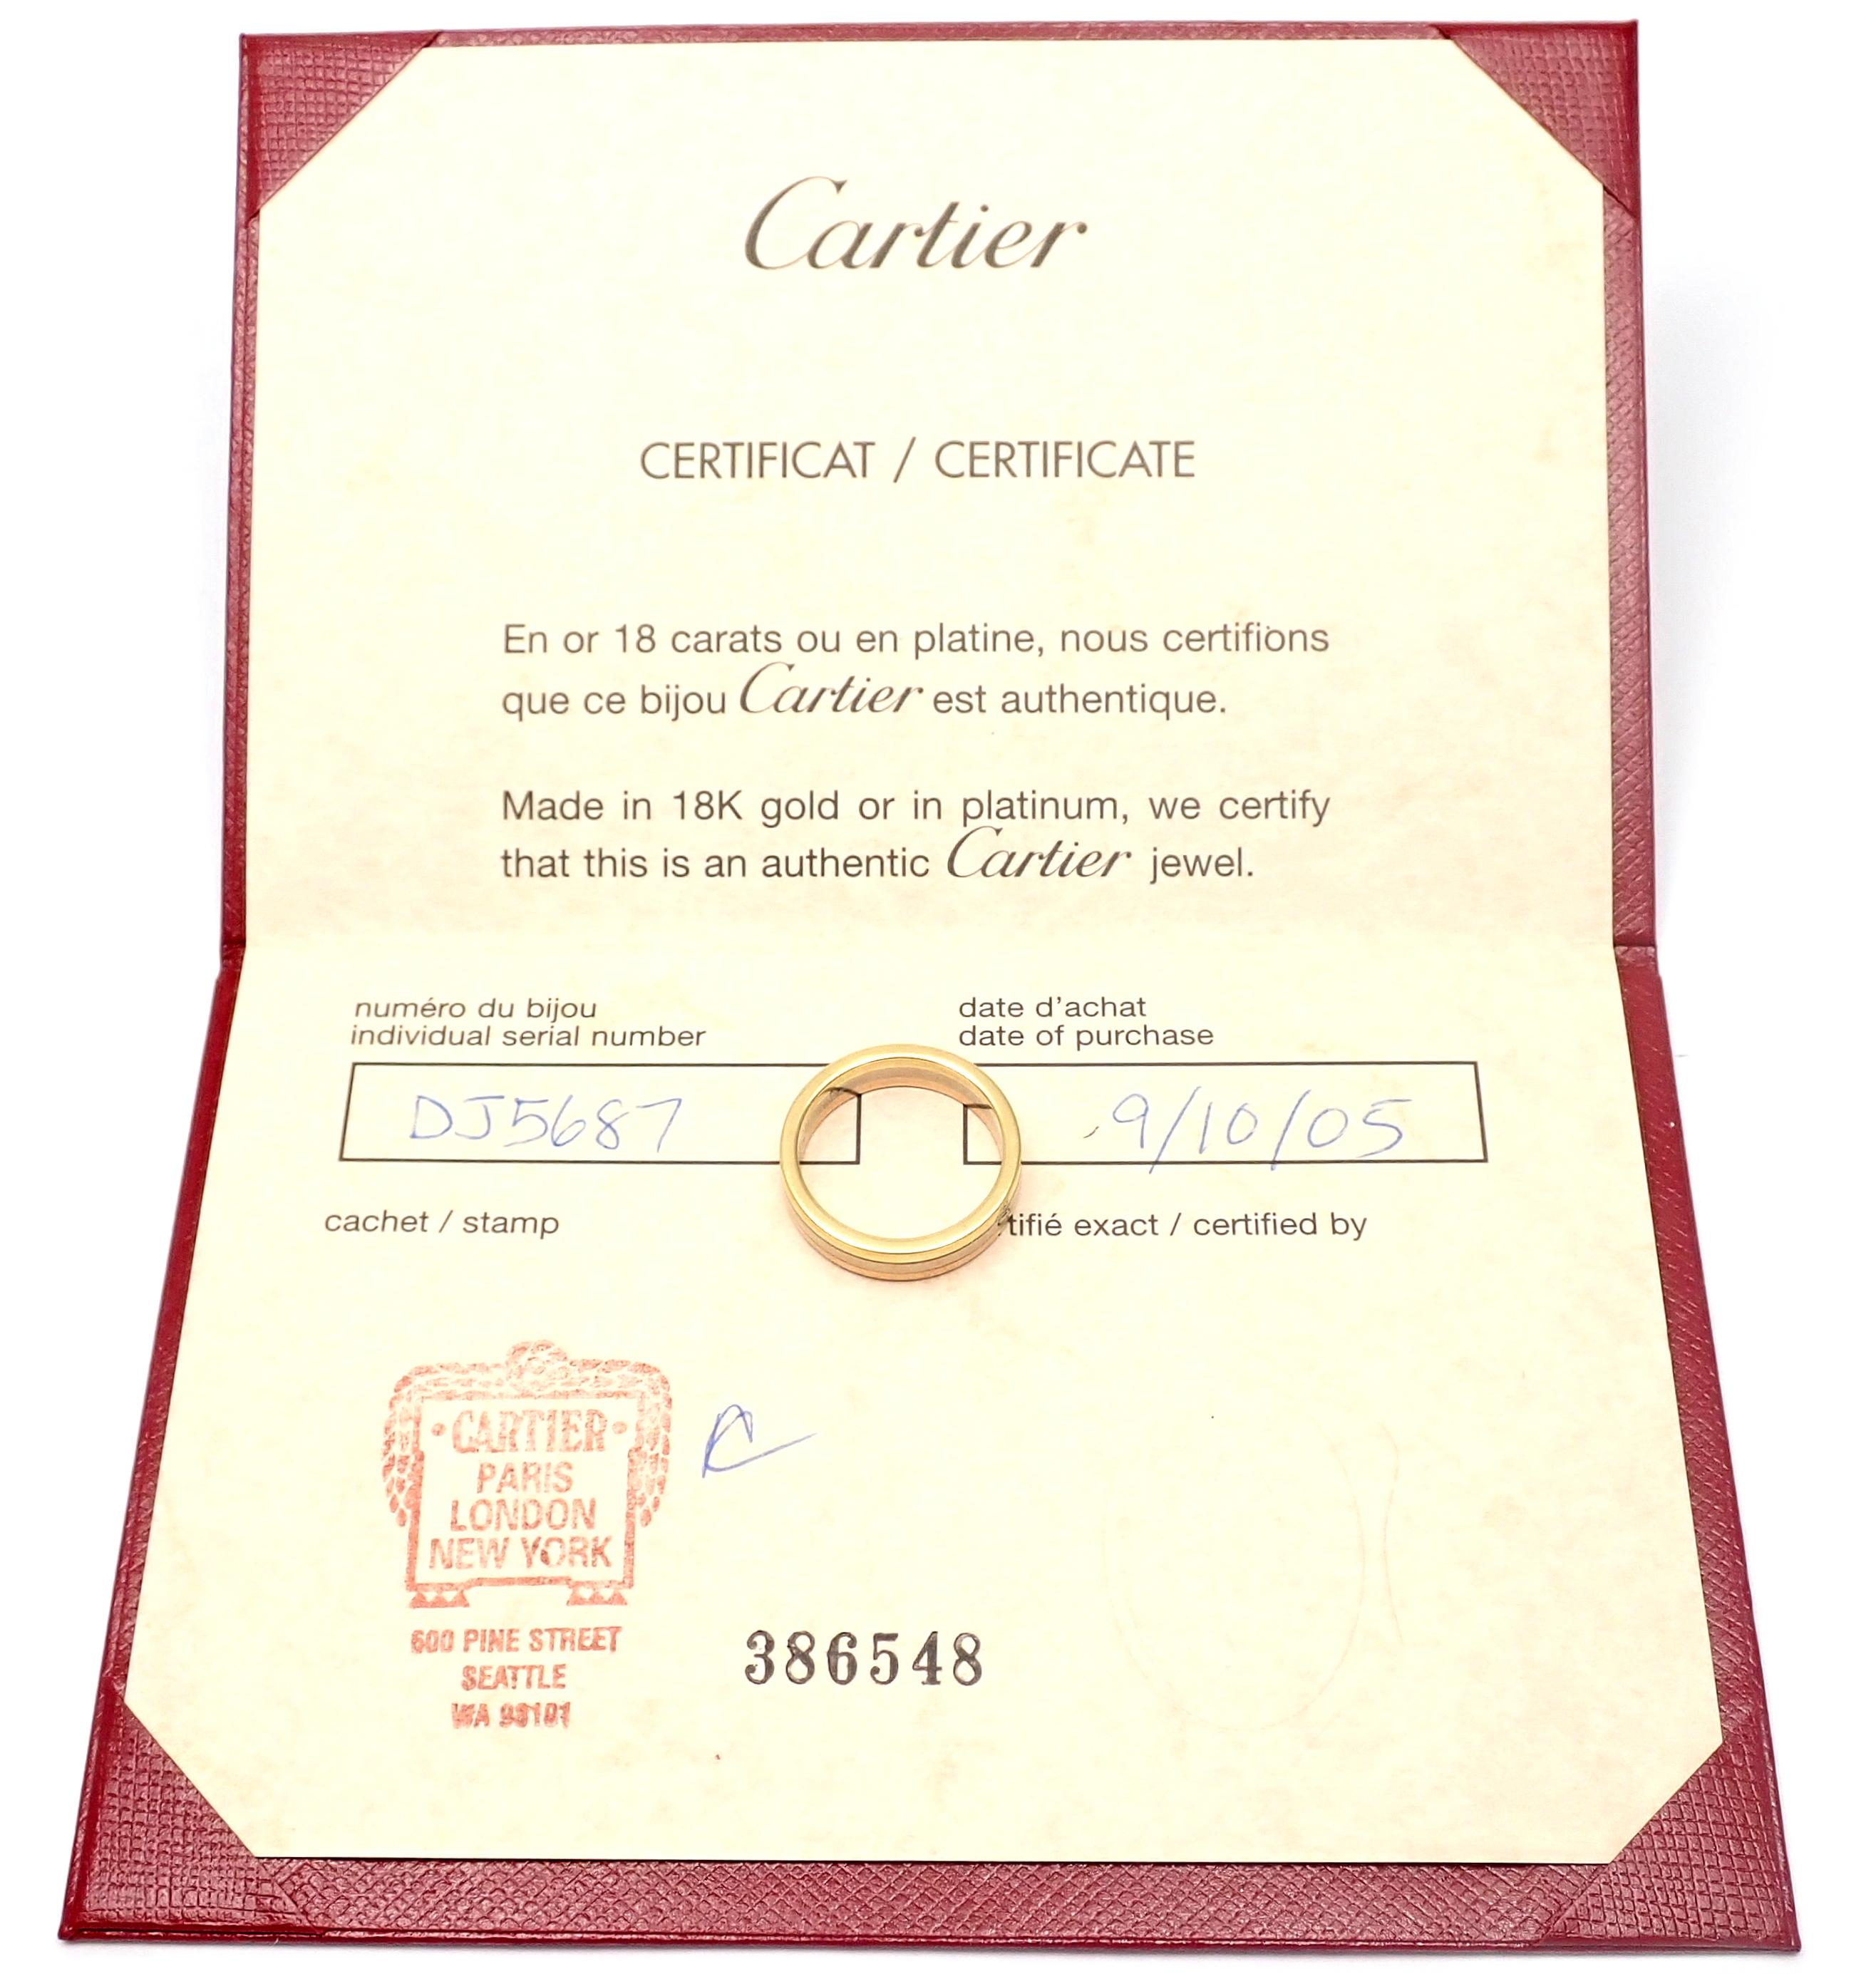 18k White, Yellow And Rose Gold Trinity Band Ring by Cartier. 
This ring comes with Cartier certificate of authenticity.
Details: 
Ring Size: European 51, US 5 3/4
Width: 5mm each band
Weight: 6.4 grams
Stamped Hallmarks: Cartier 750 51 DJ5687
*Free